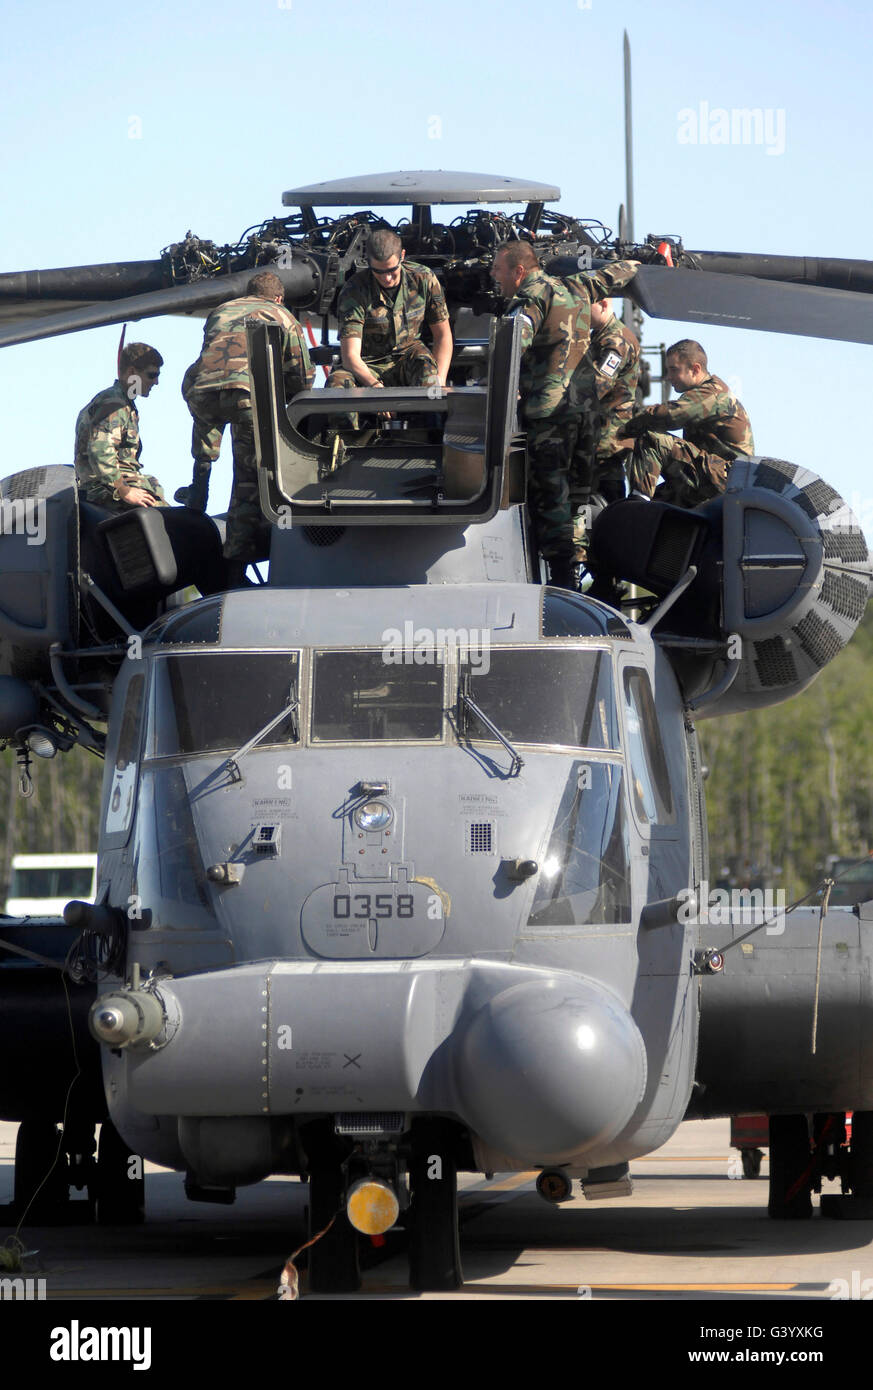 Airmen conduct training on the MH-53 Pave Low. Stock Photo